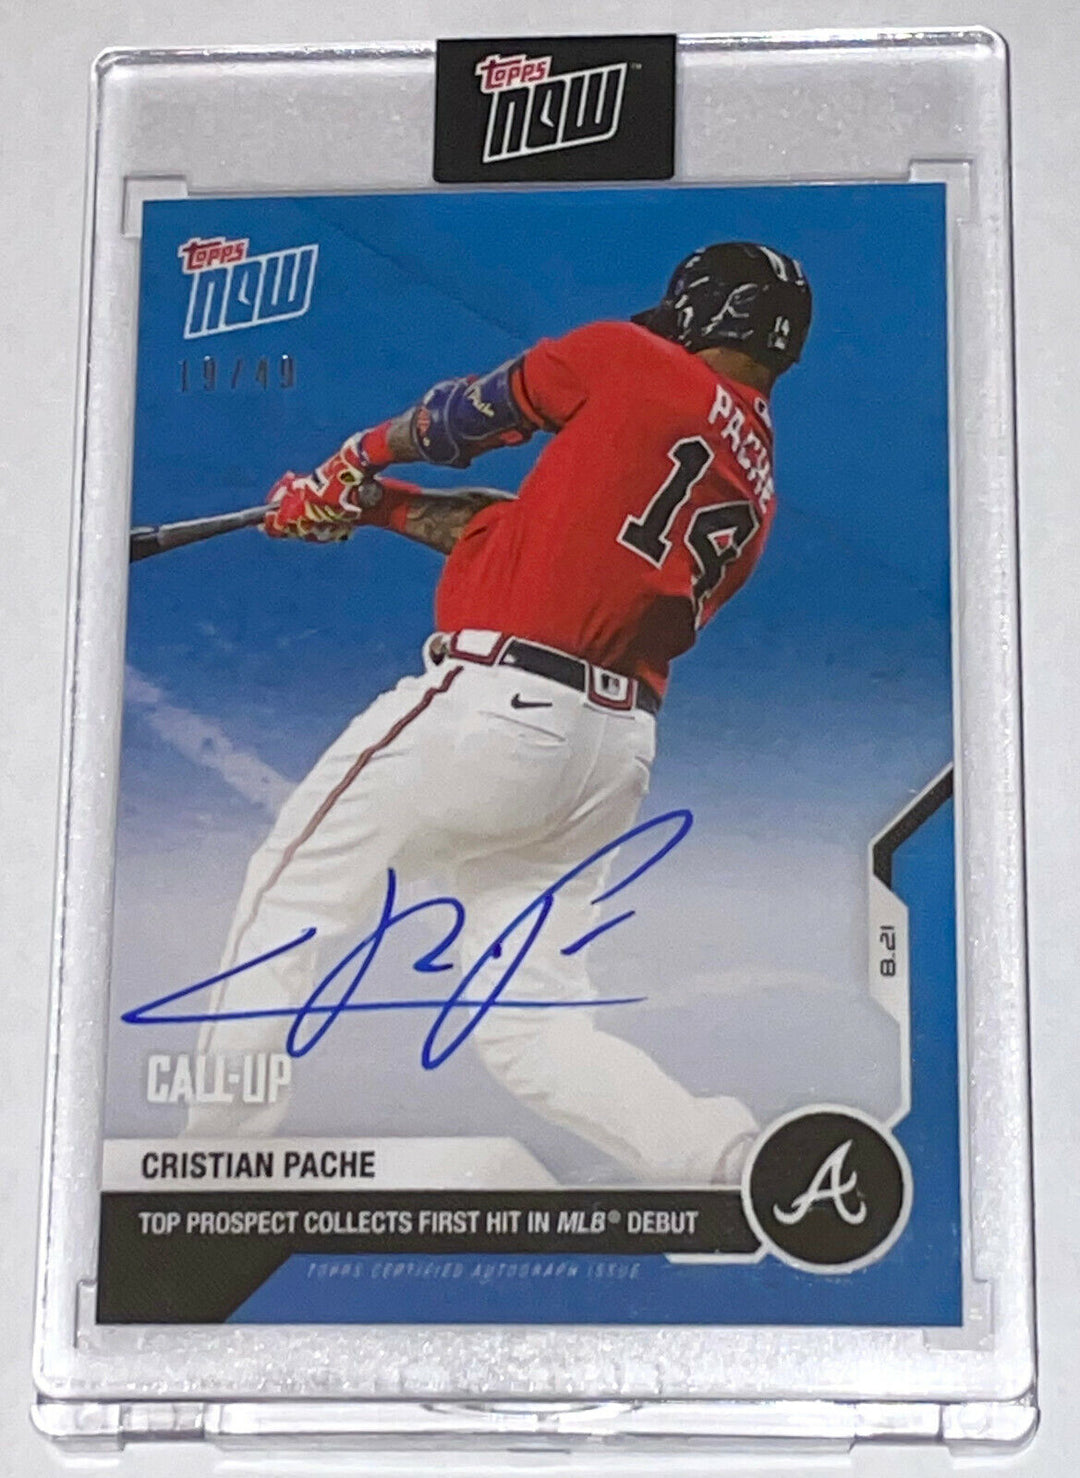 2020 CRISTIAN PACHE SIGNED TOPPS NOW AUTO CARD 139B TOP PROSPECT COLLECT 1st HIT Image 3